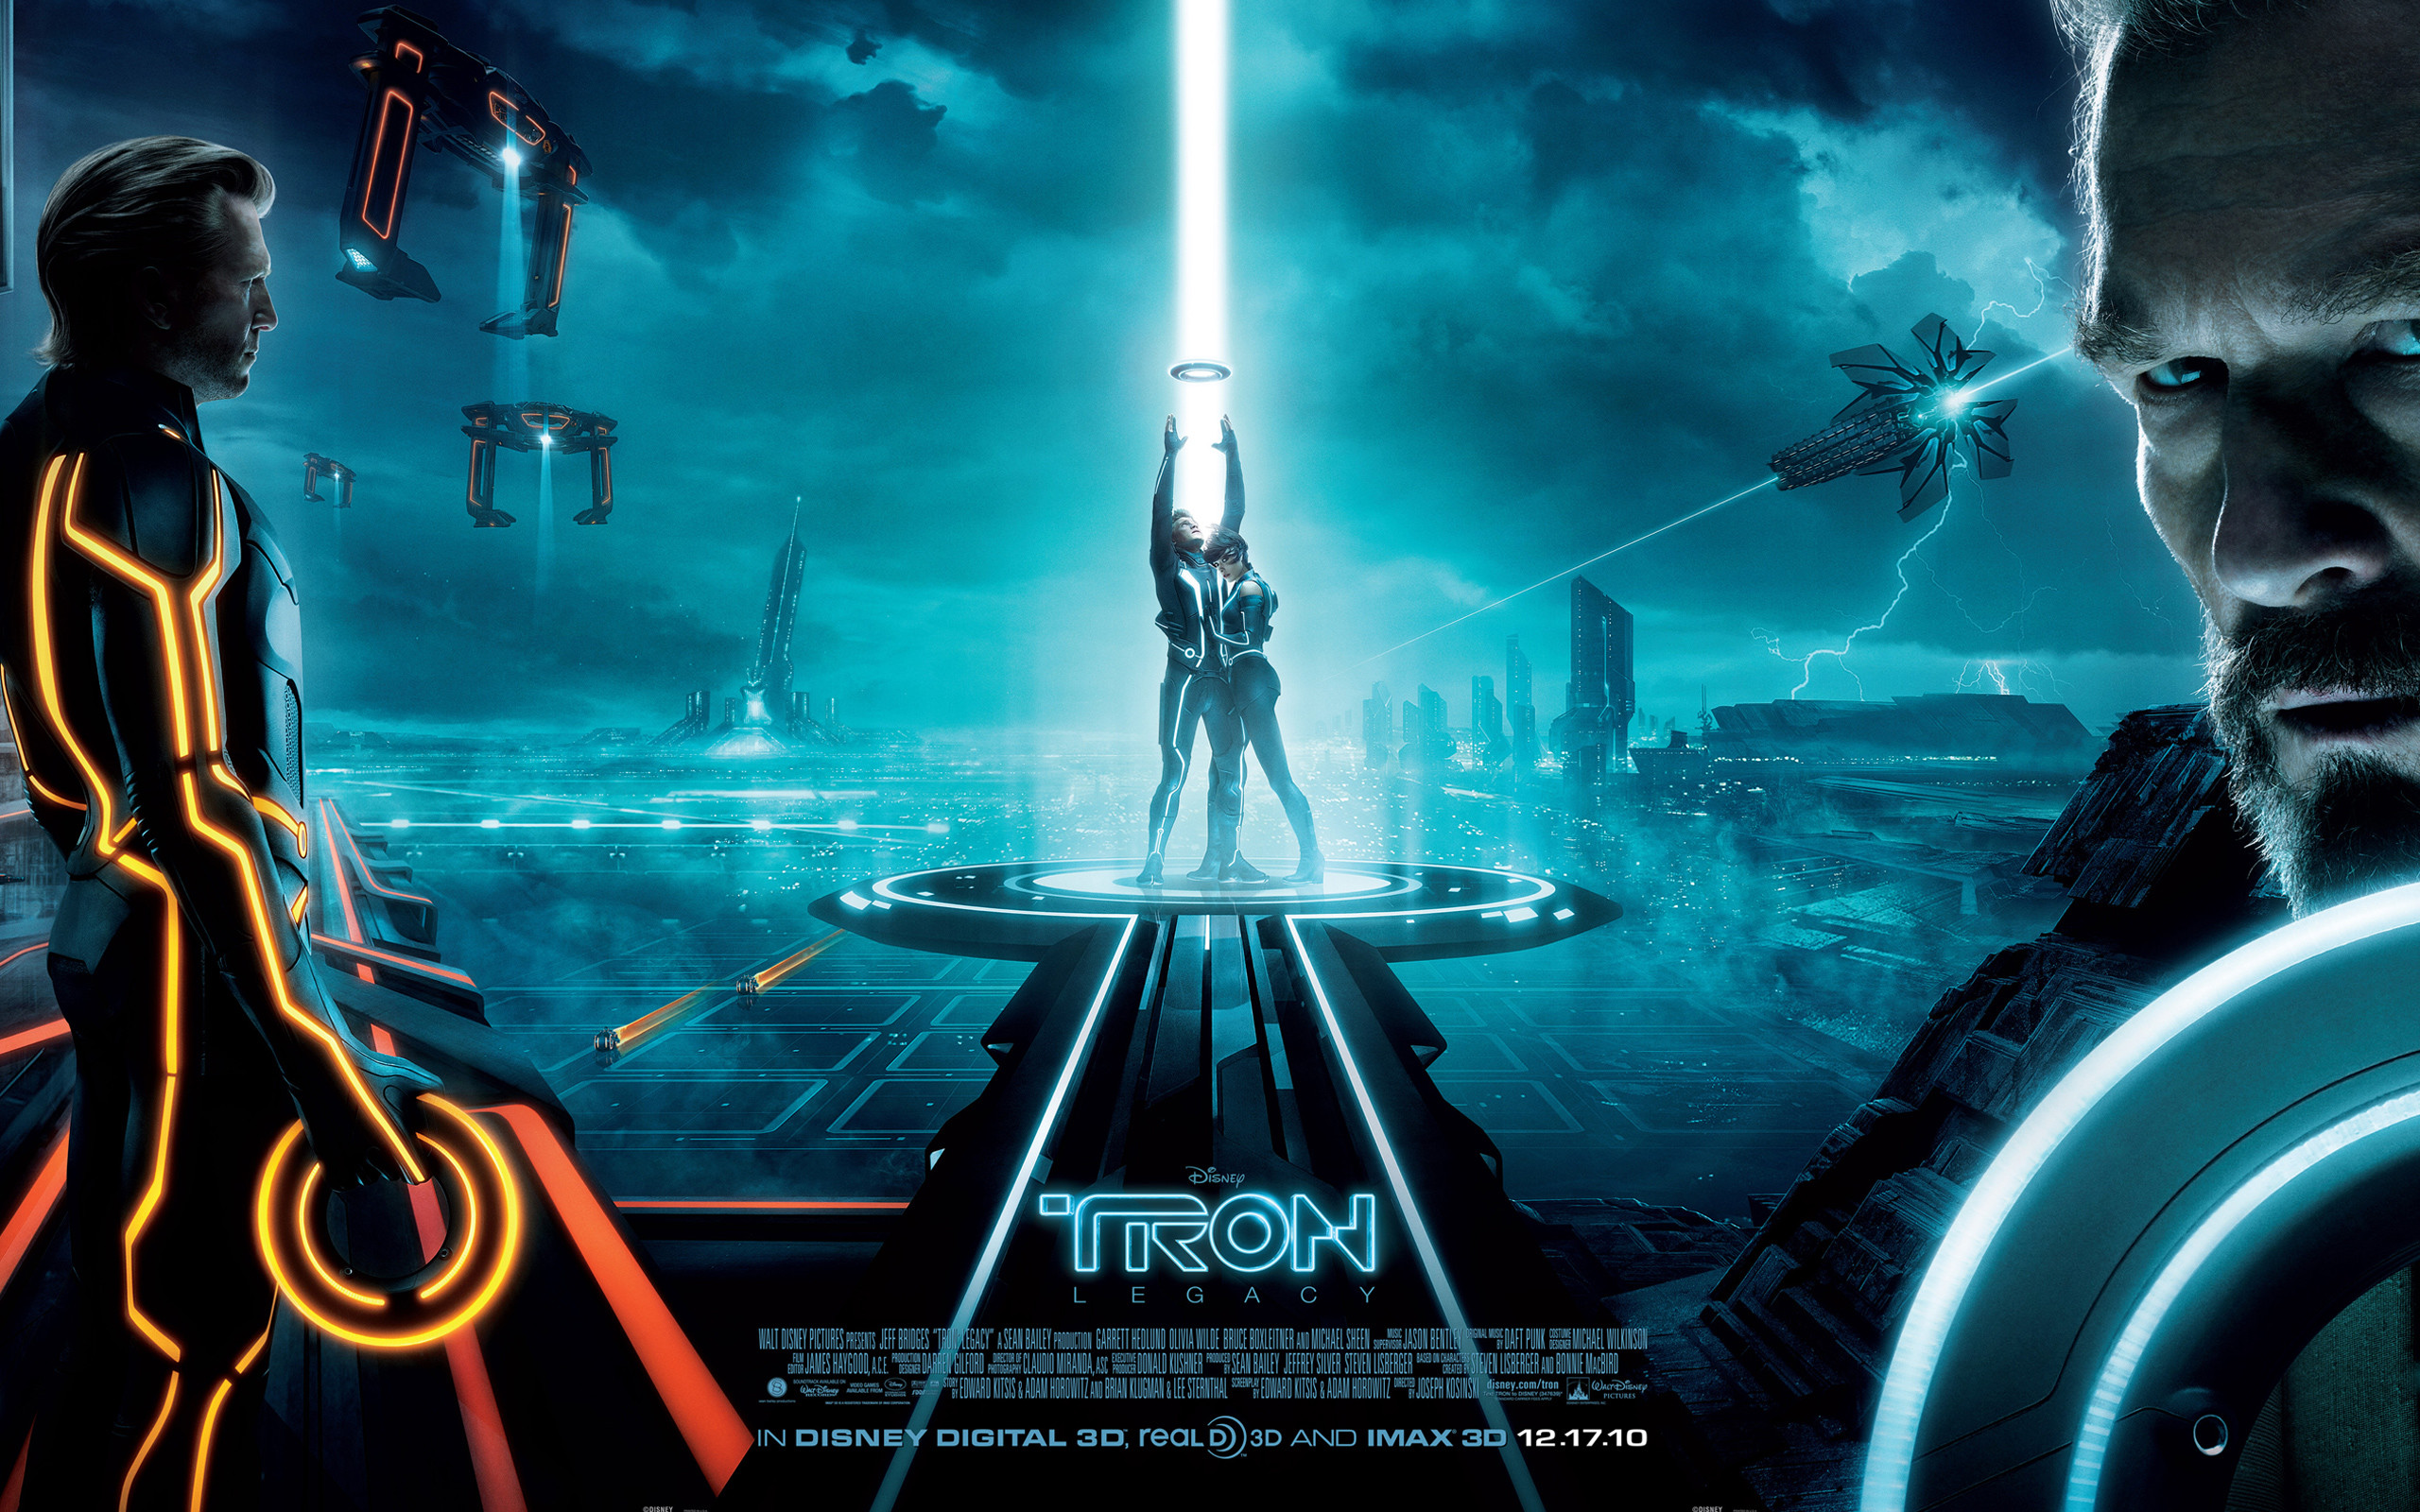 Wallpaper picture of the main characters from Disneys Tron Legacy movie Clu, Sam Flynn, Quorra and Kevin Flynn. See all Tron